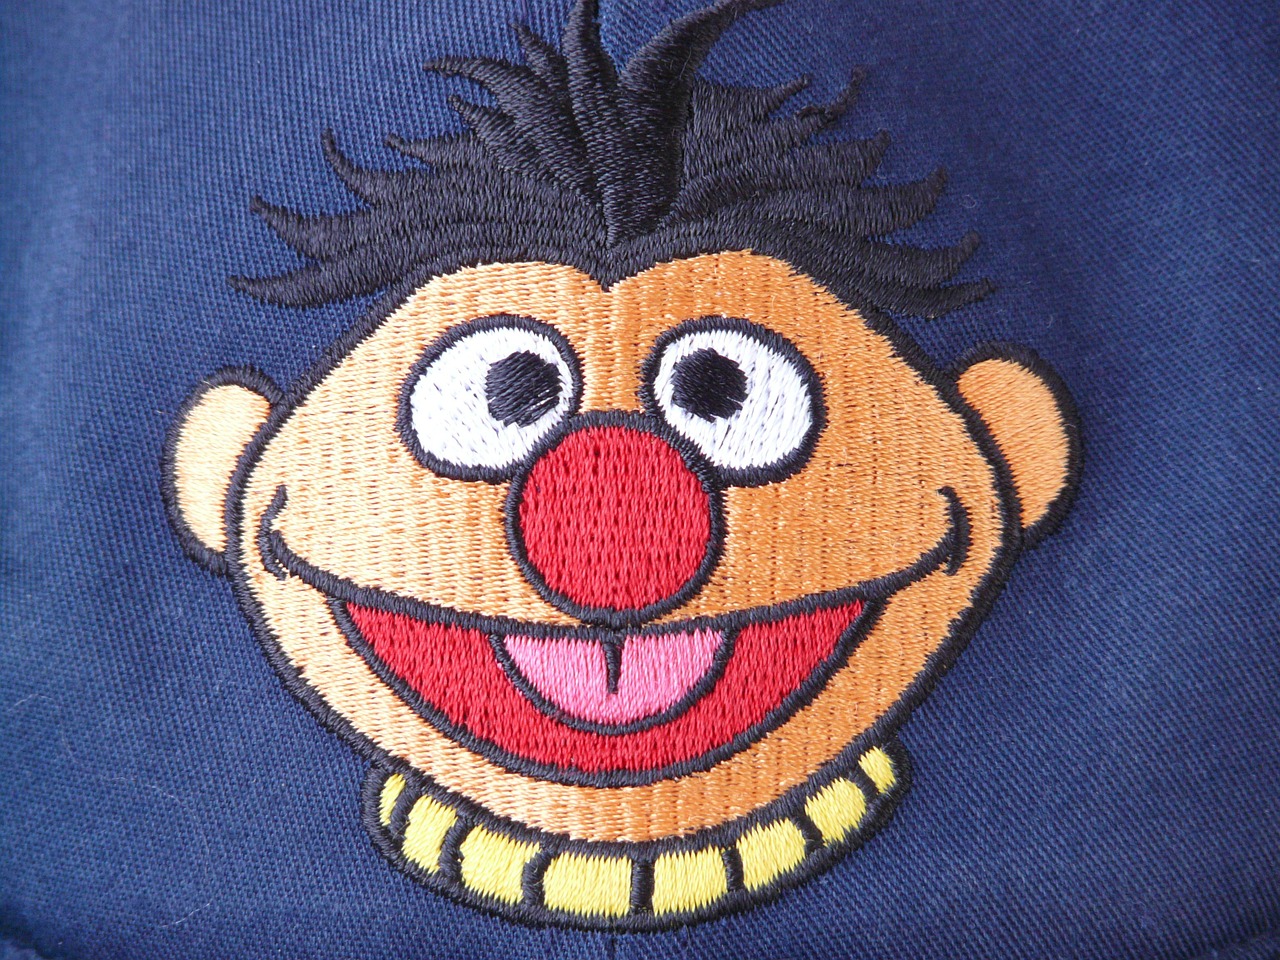 ernie,sesame street,cartoon character,funny,fun,colorful,color,laugh,eyes,mouth,red,cute,free pictures, free photos, free images, royalty free, free illustrations, public domain